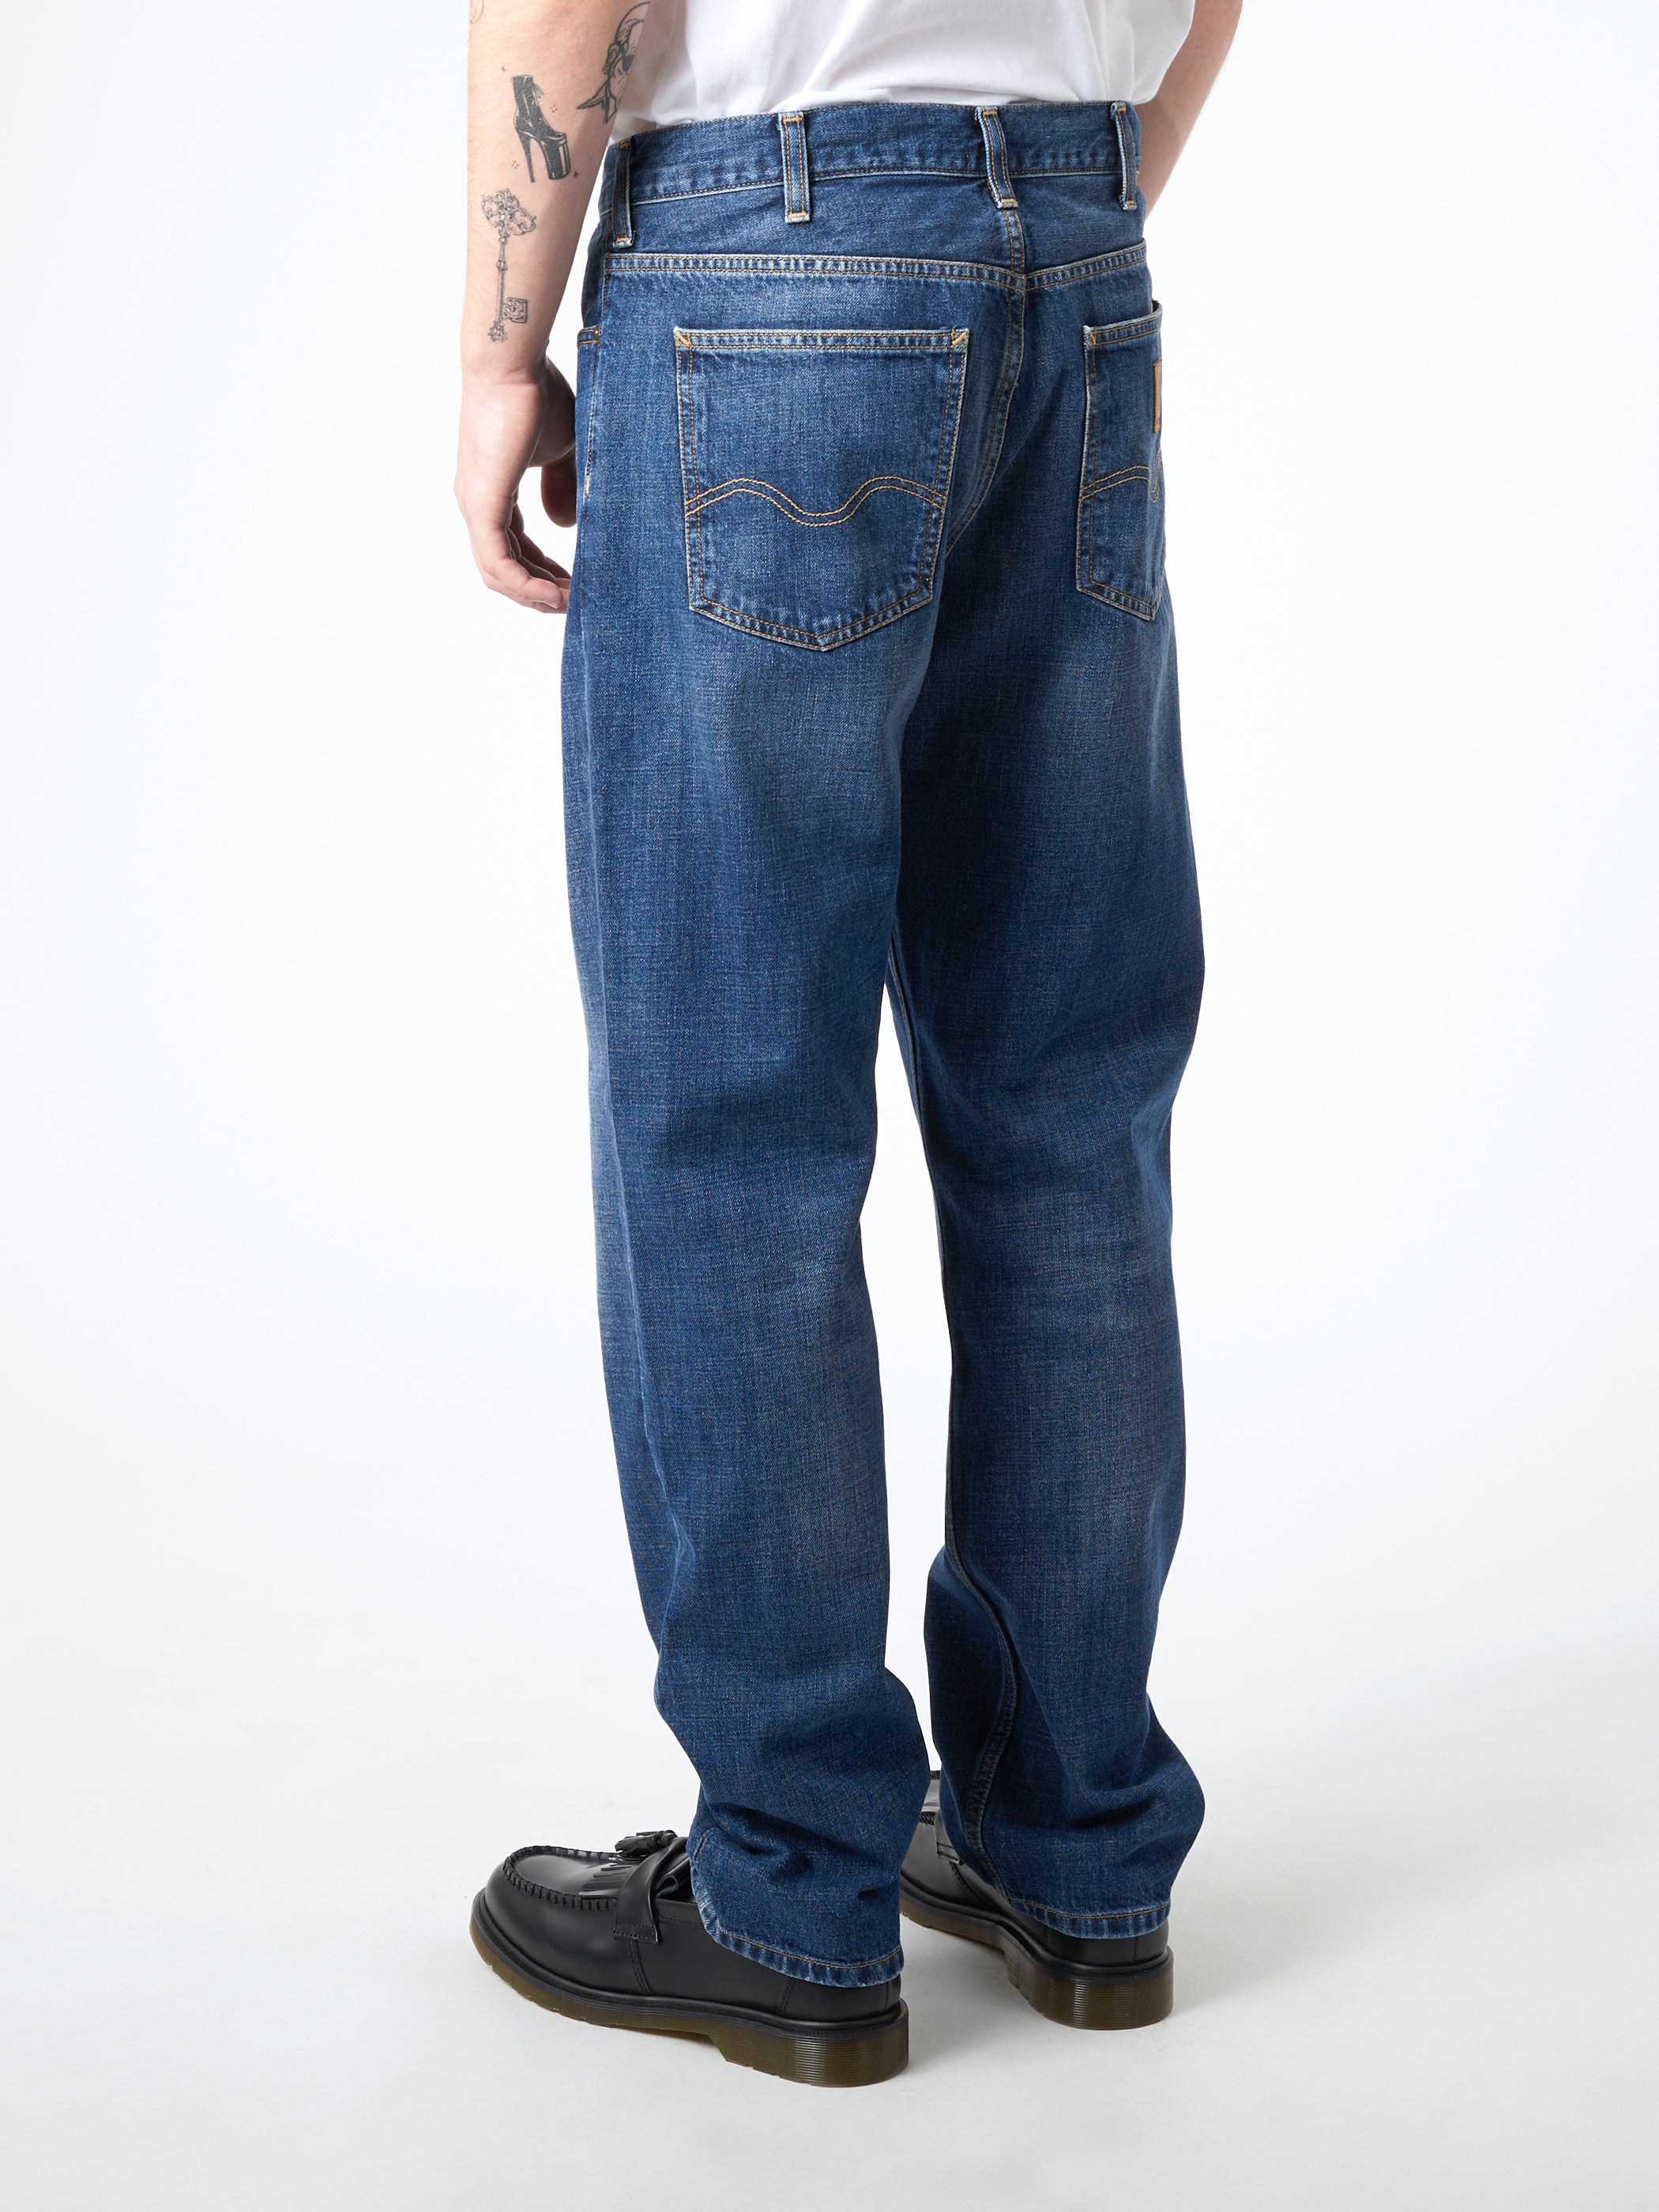 Carhartt WIP – tagged pants– gravitypope